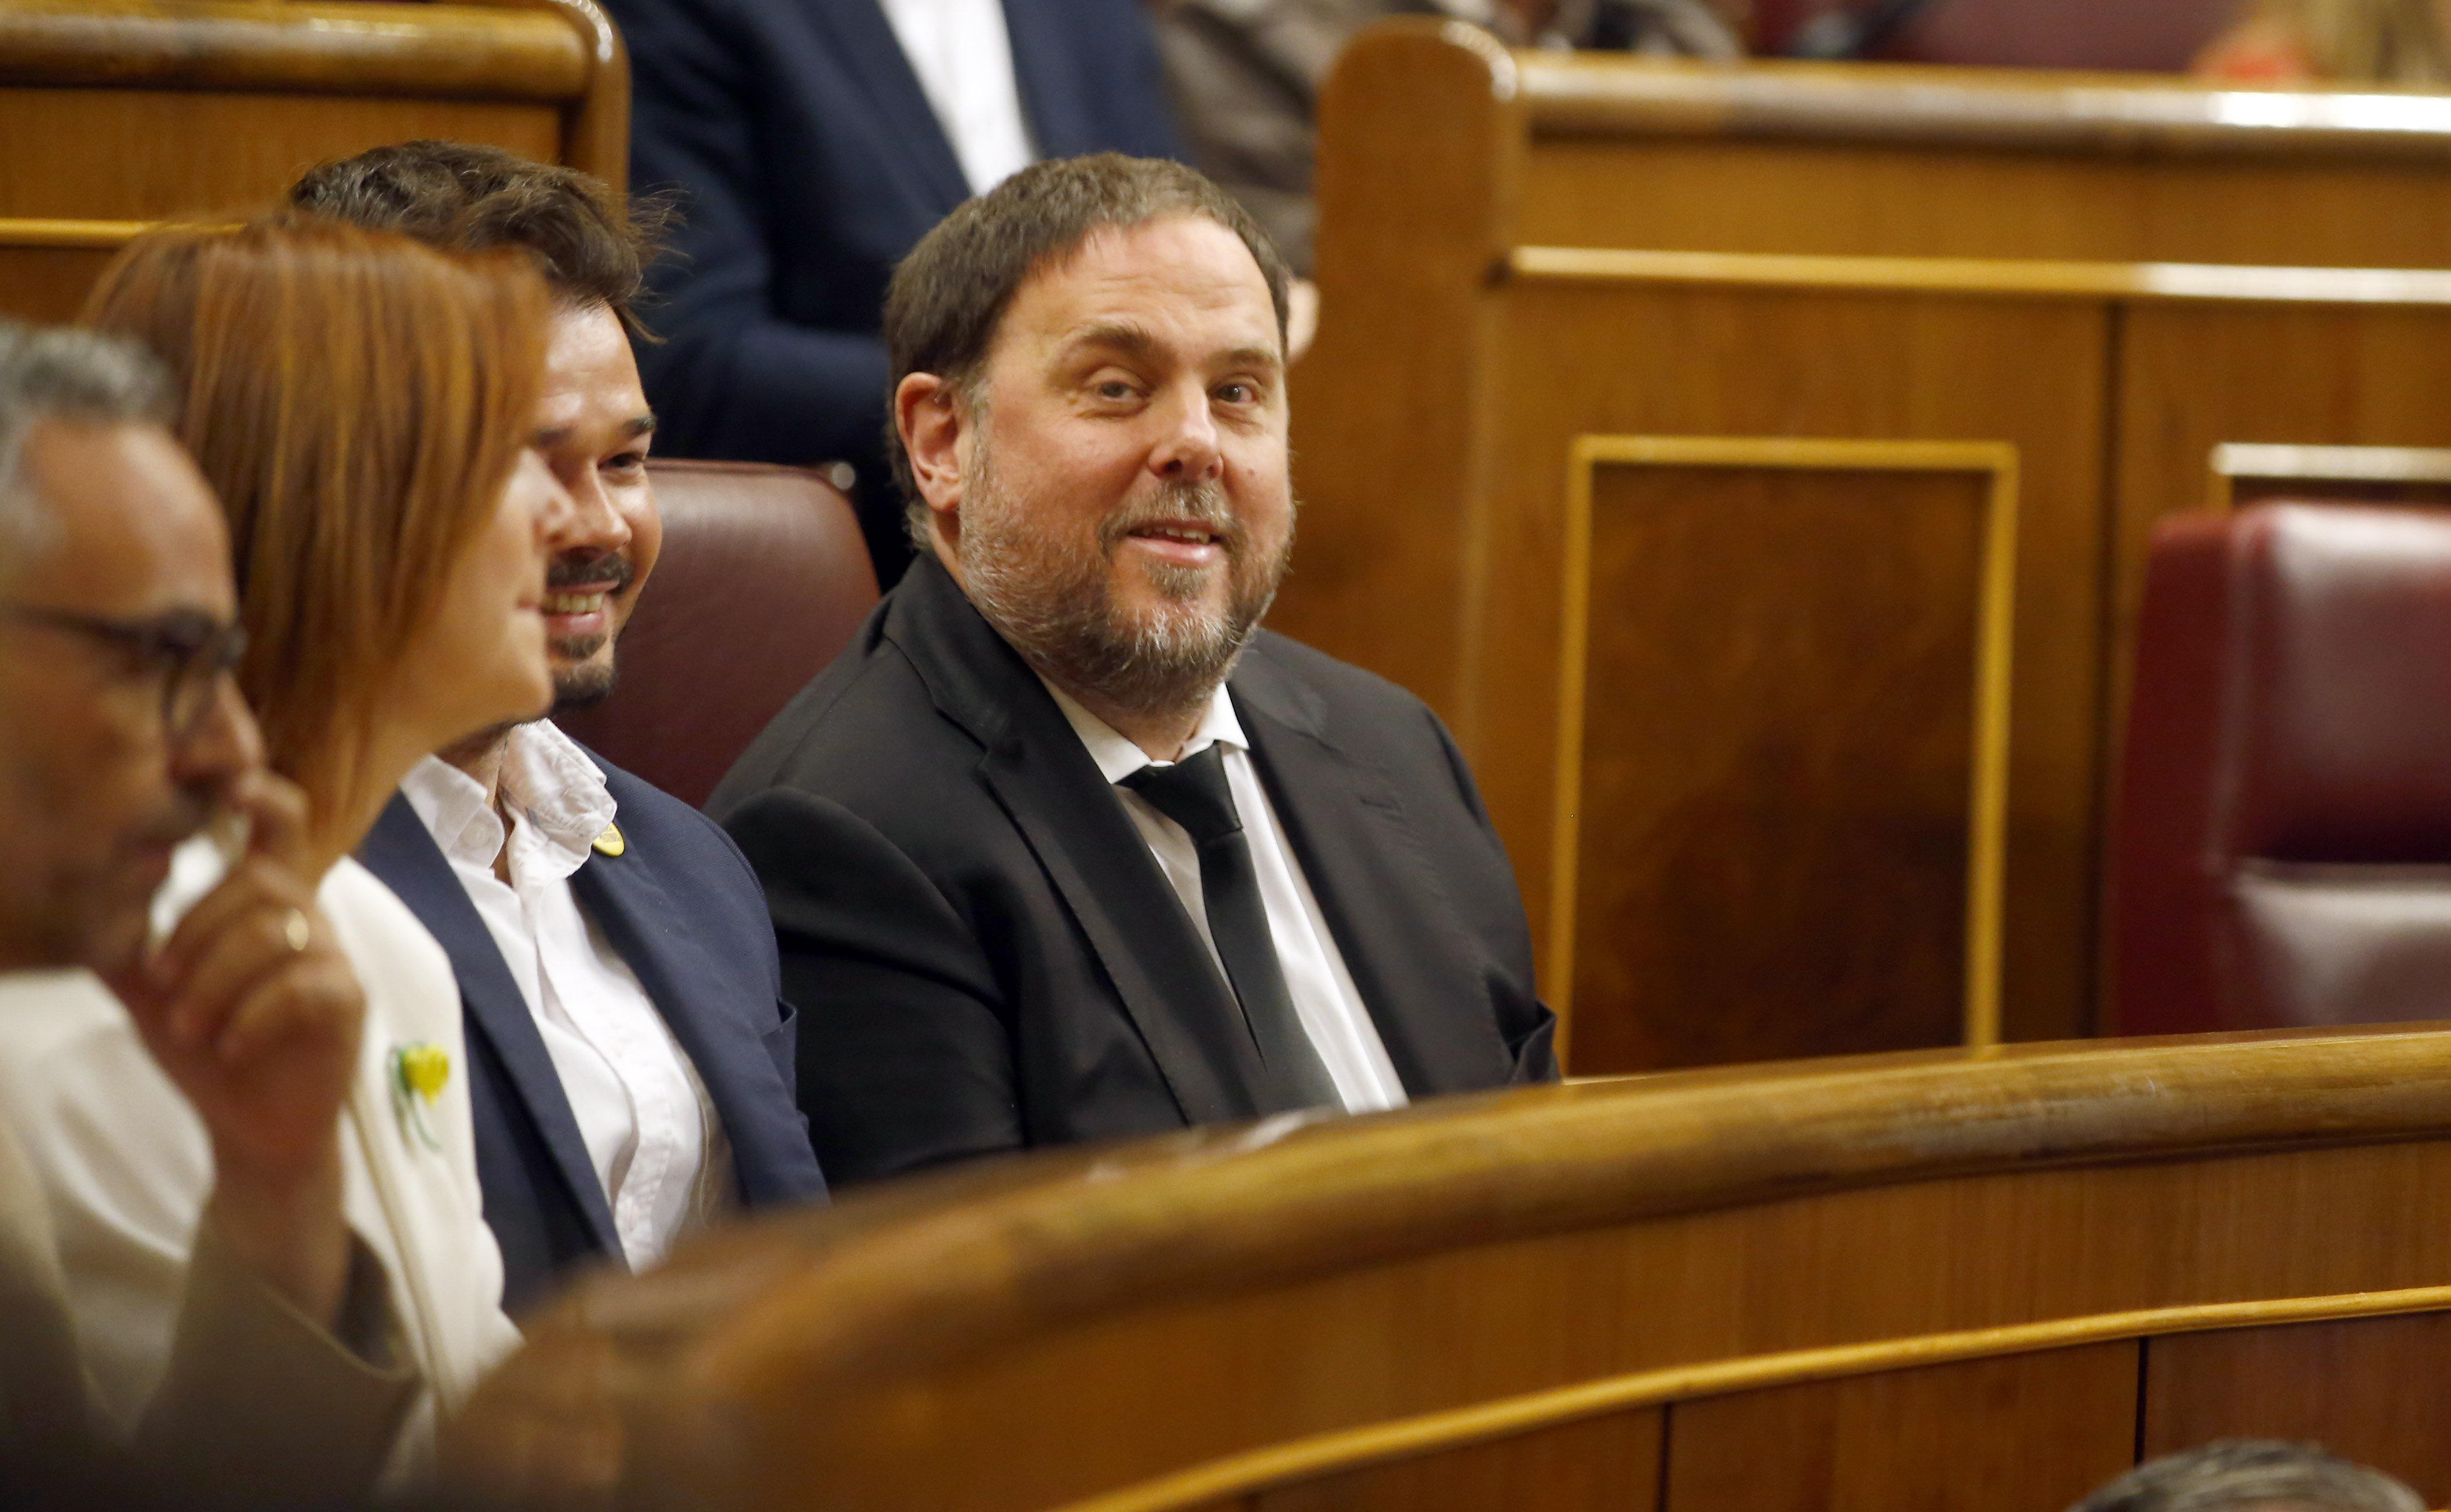 Oriol Junqueras takes his seat in Spain's Congress